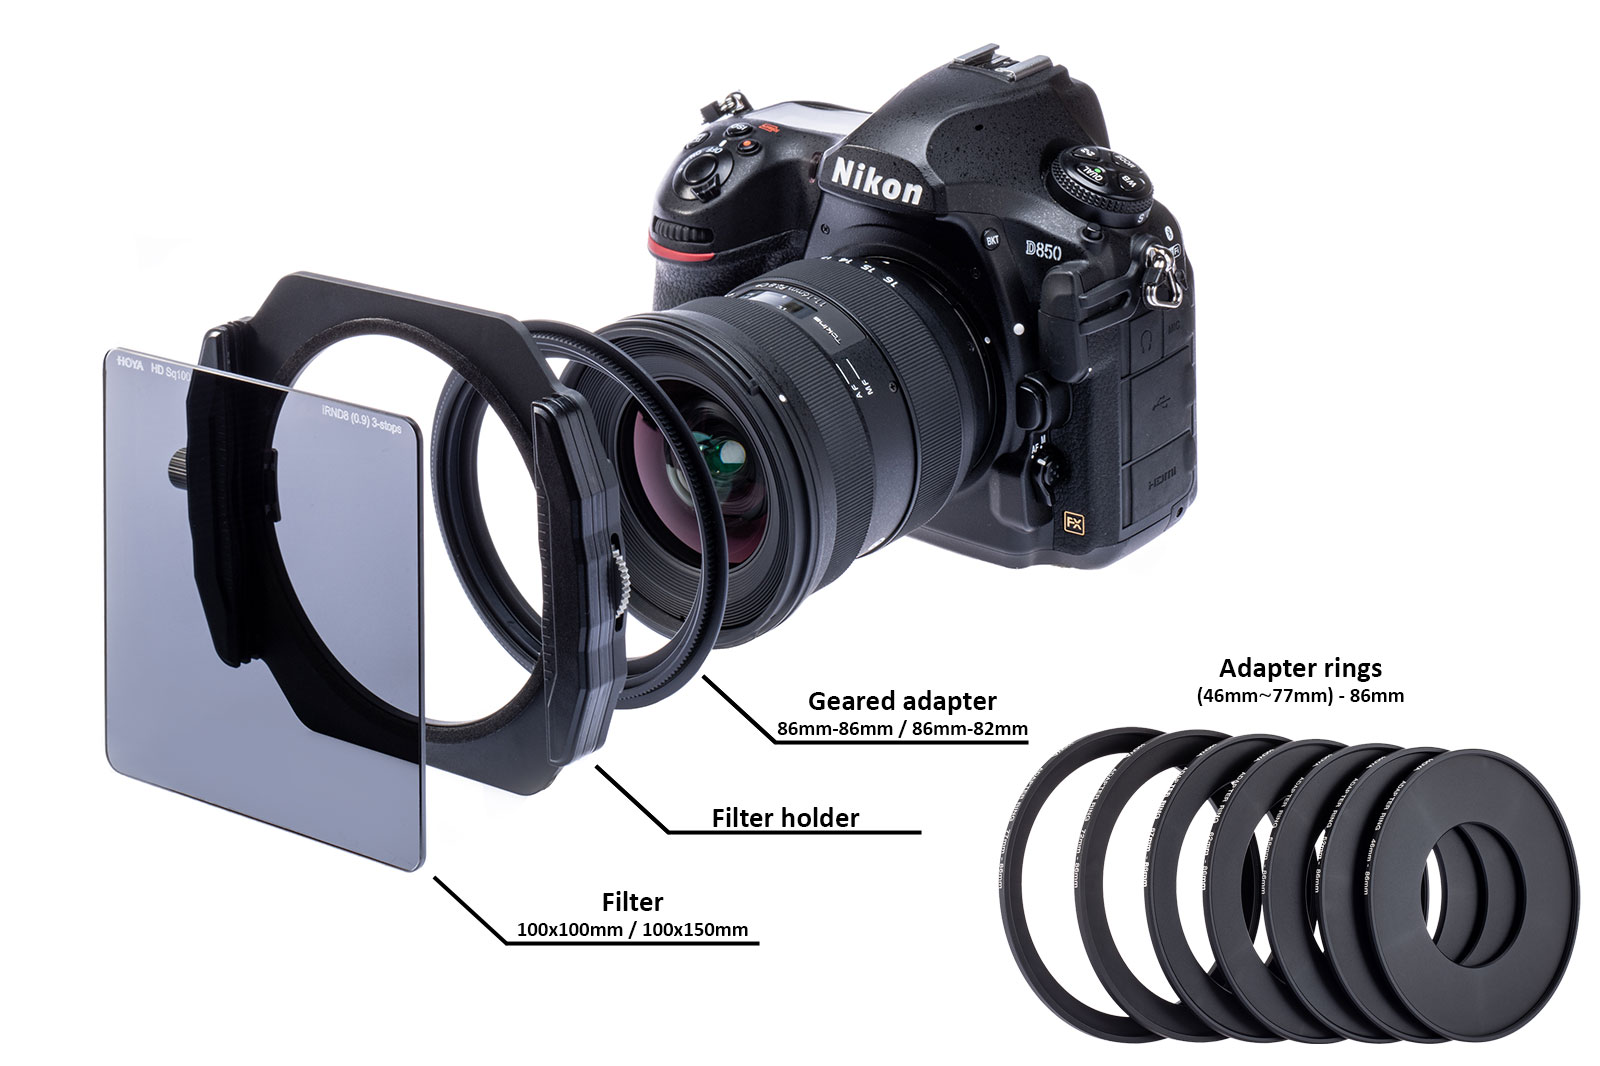 Hoya Sq100 Holder Kit With Polarizer Geared Adapters